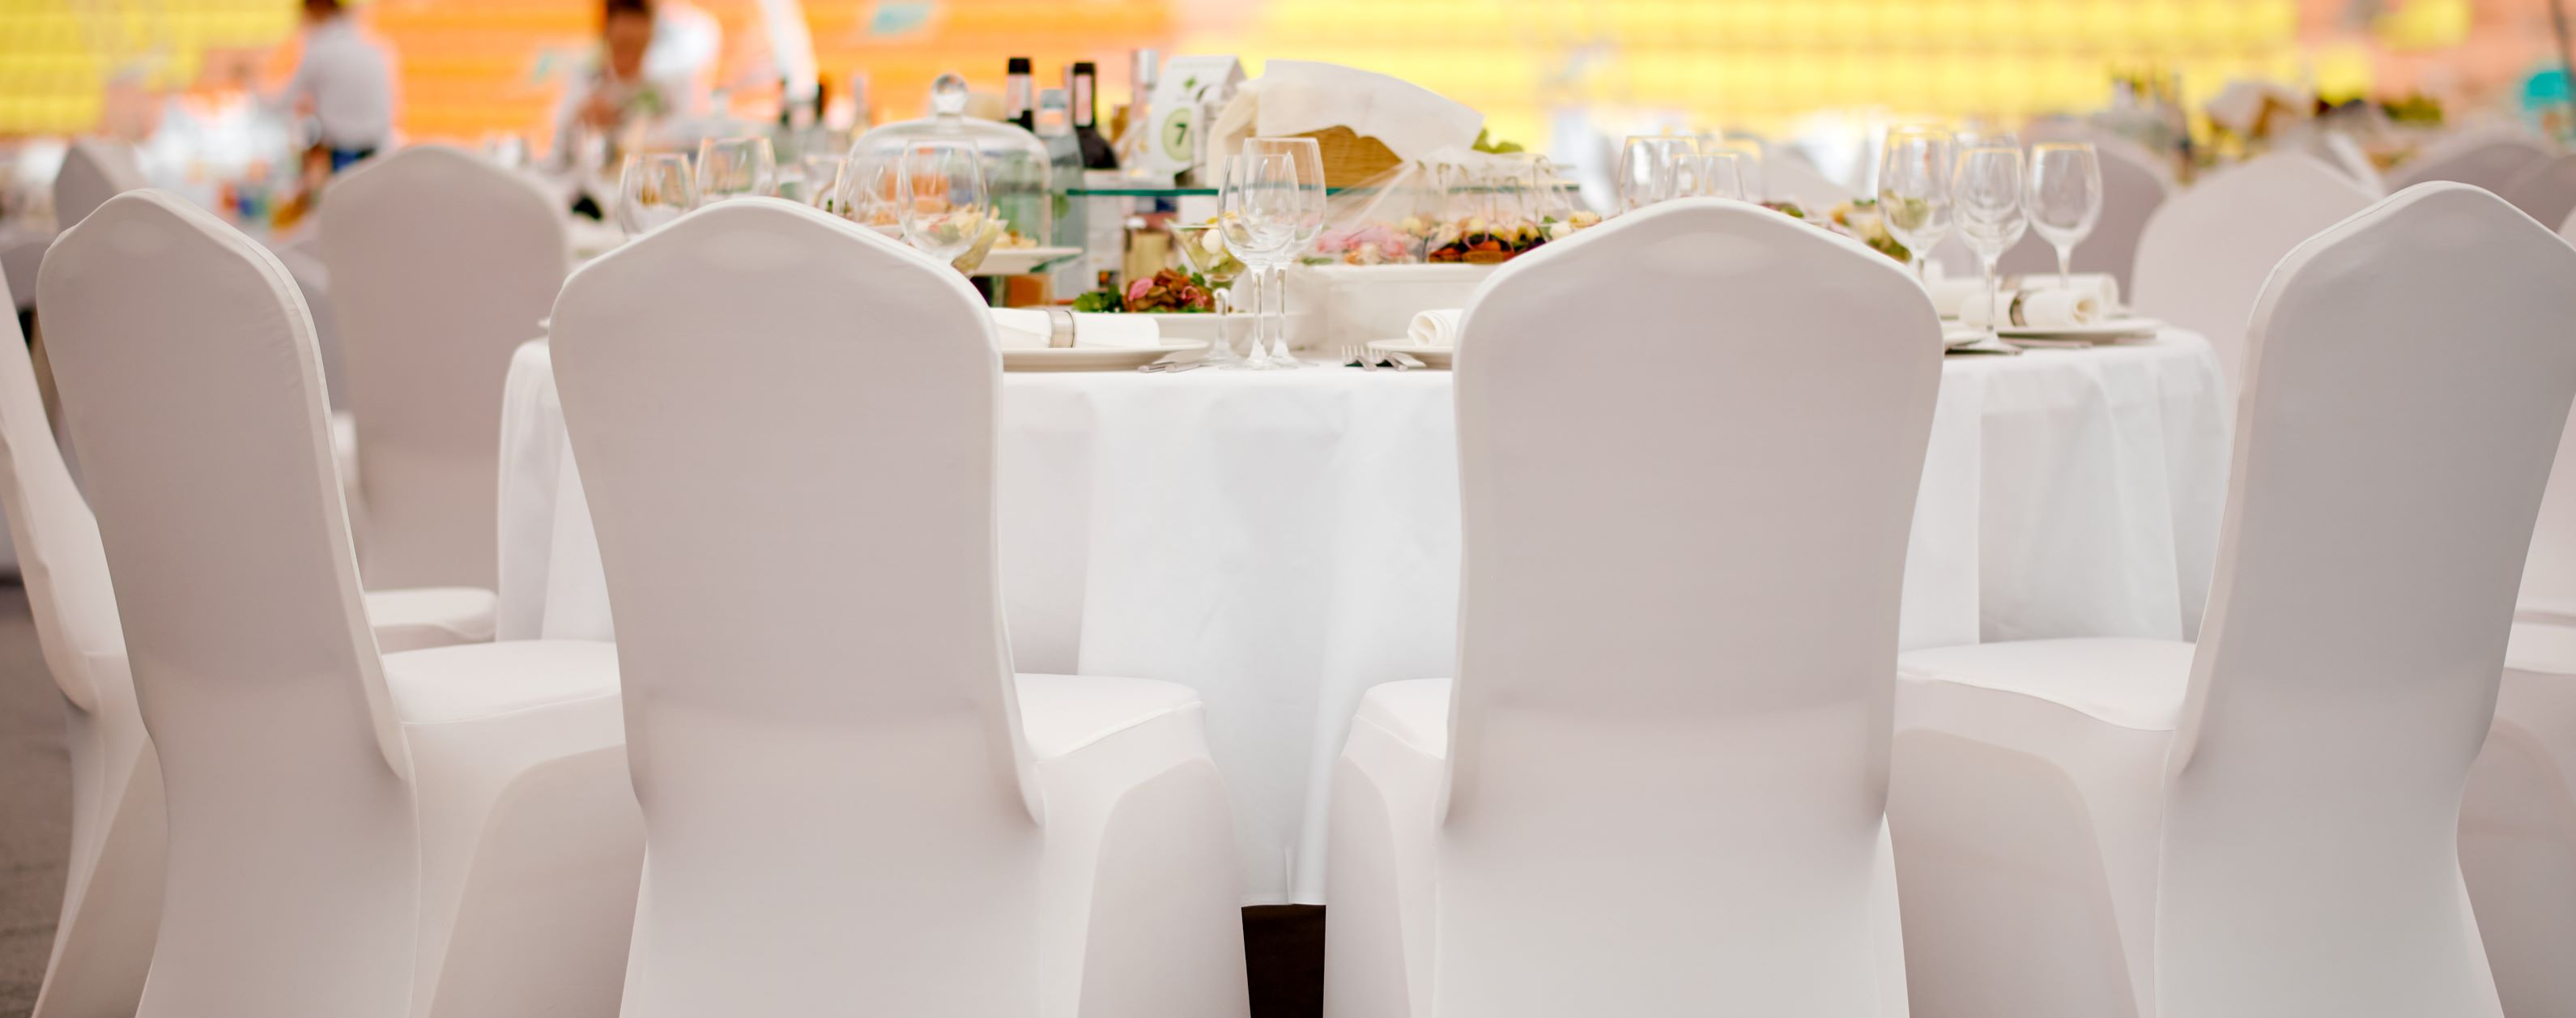 all white table linens